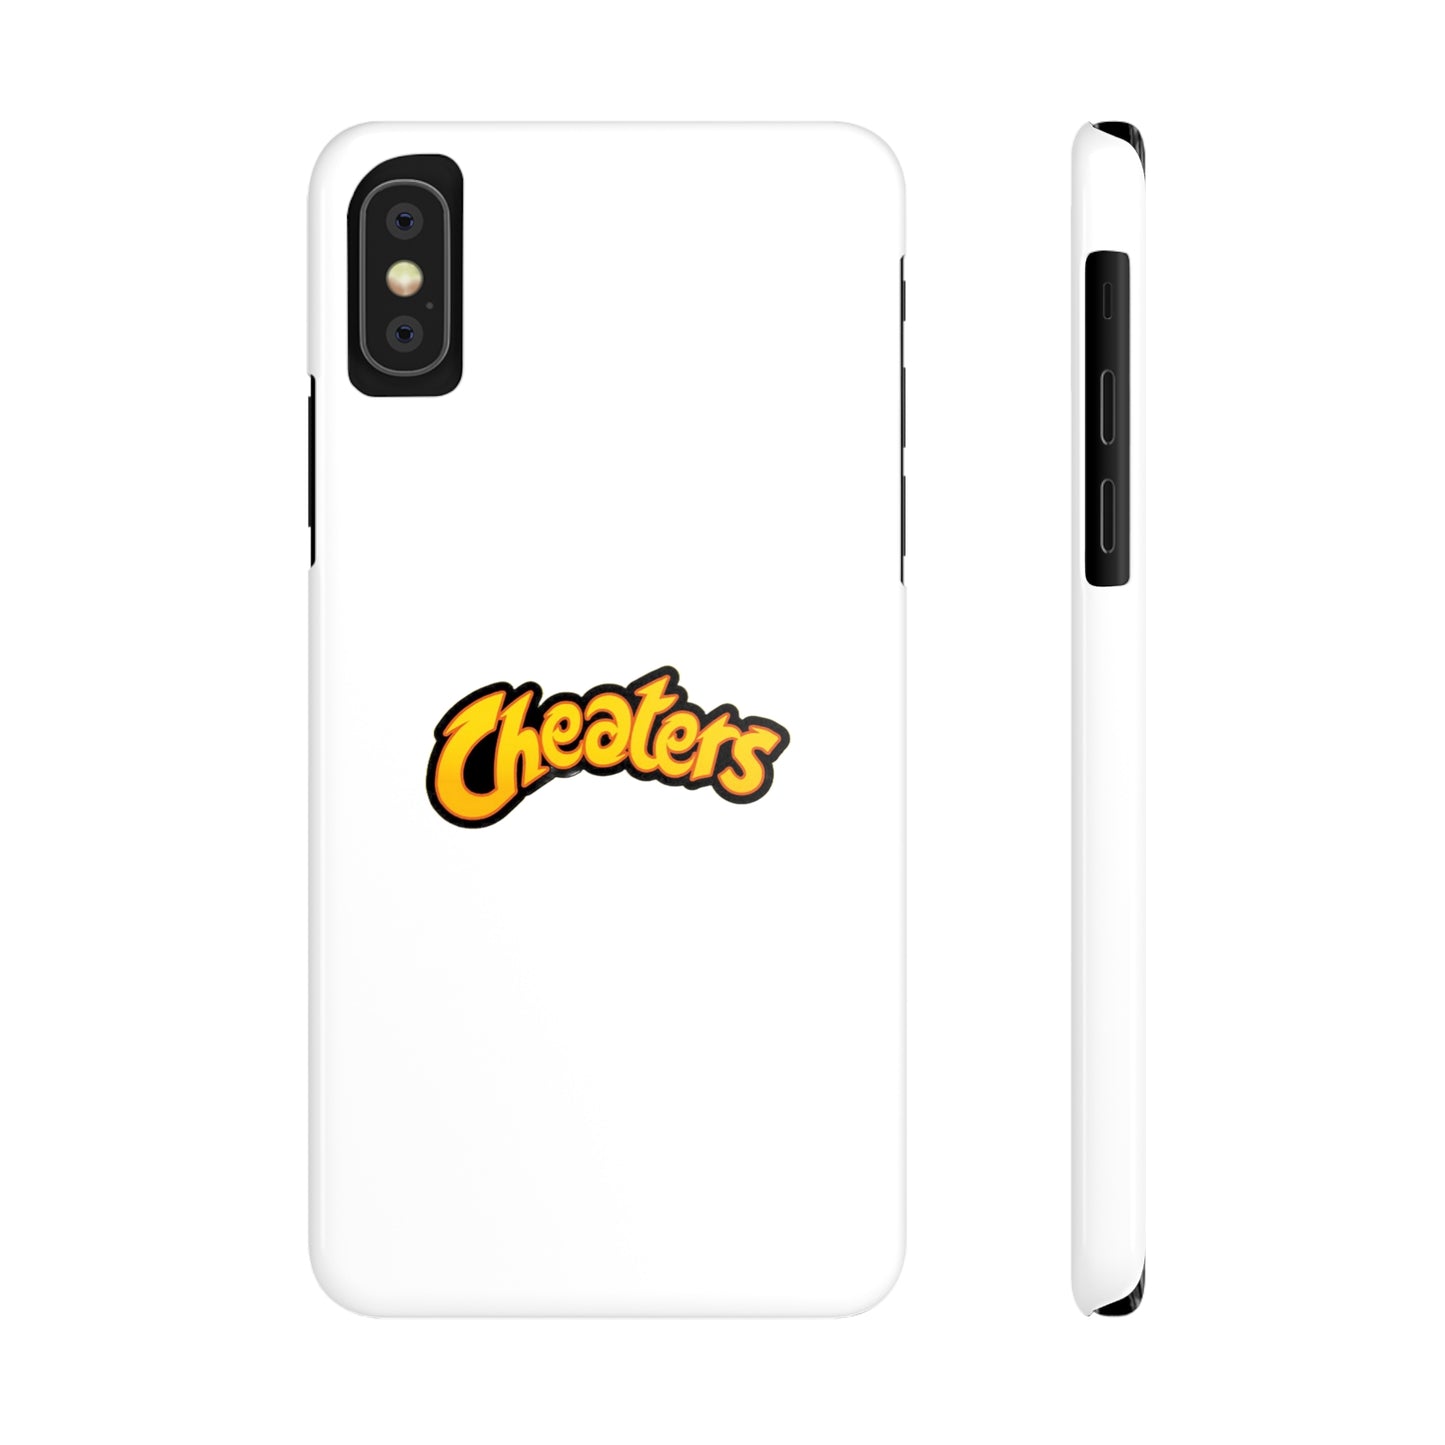 "Cheaters" MagStrong Phone Cases iPhone XS